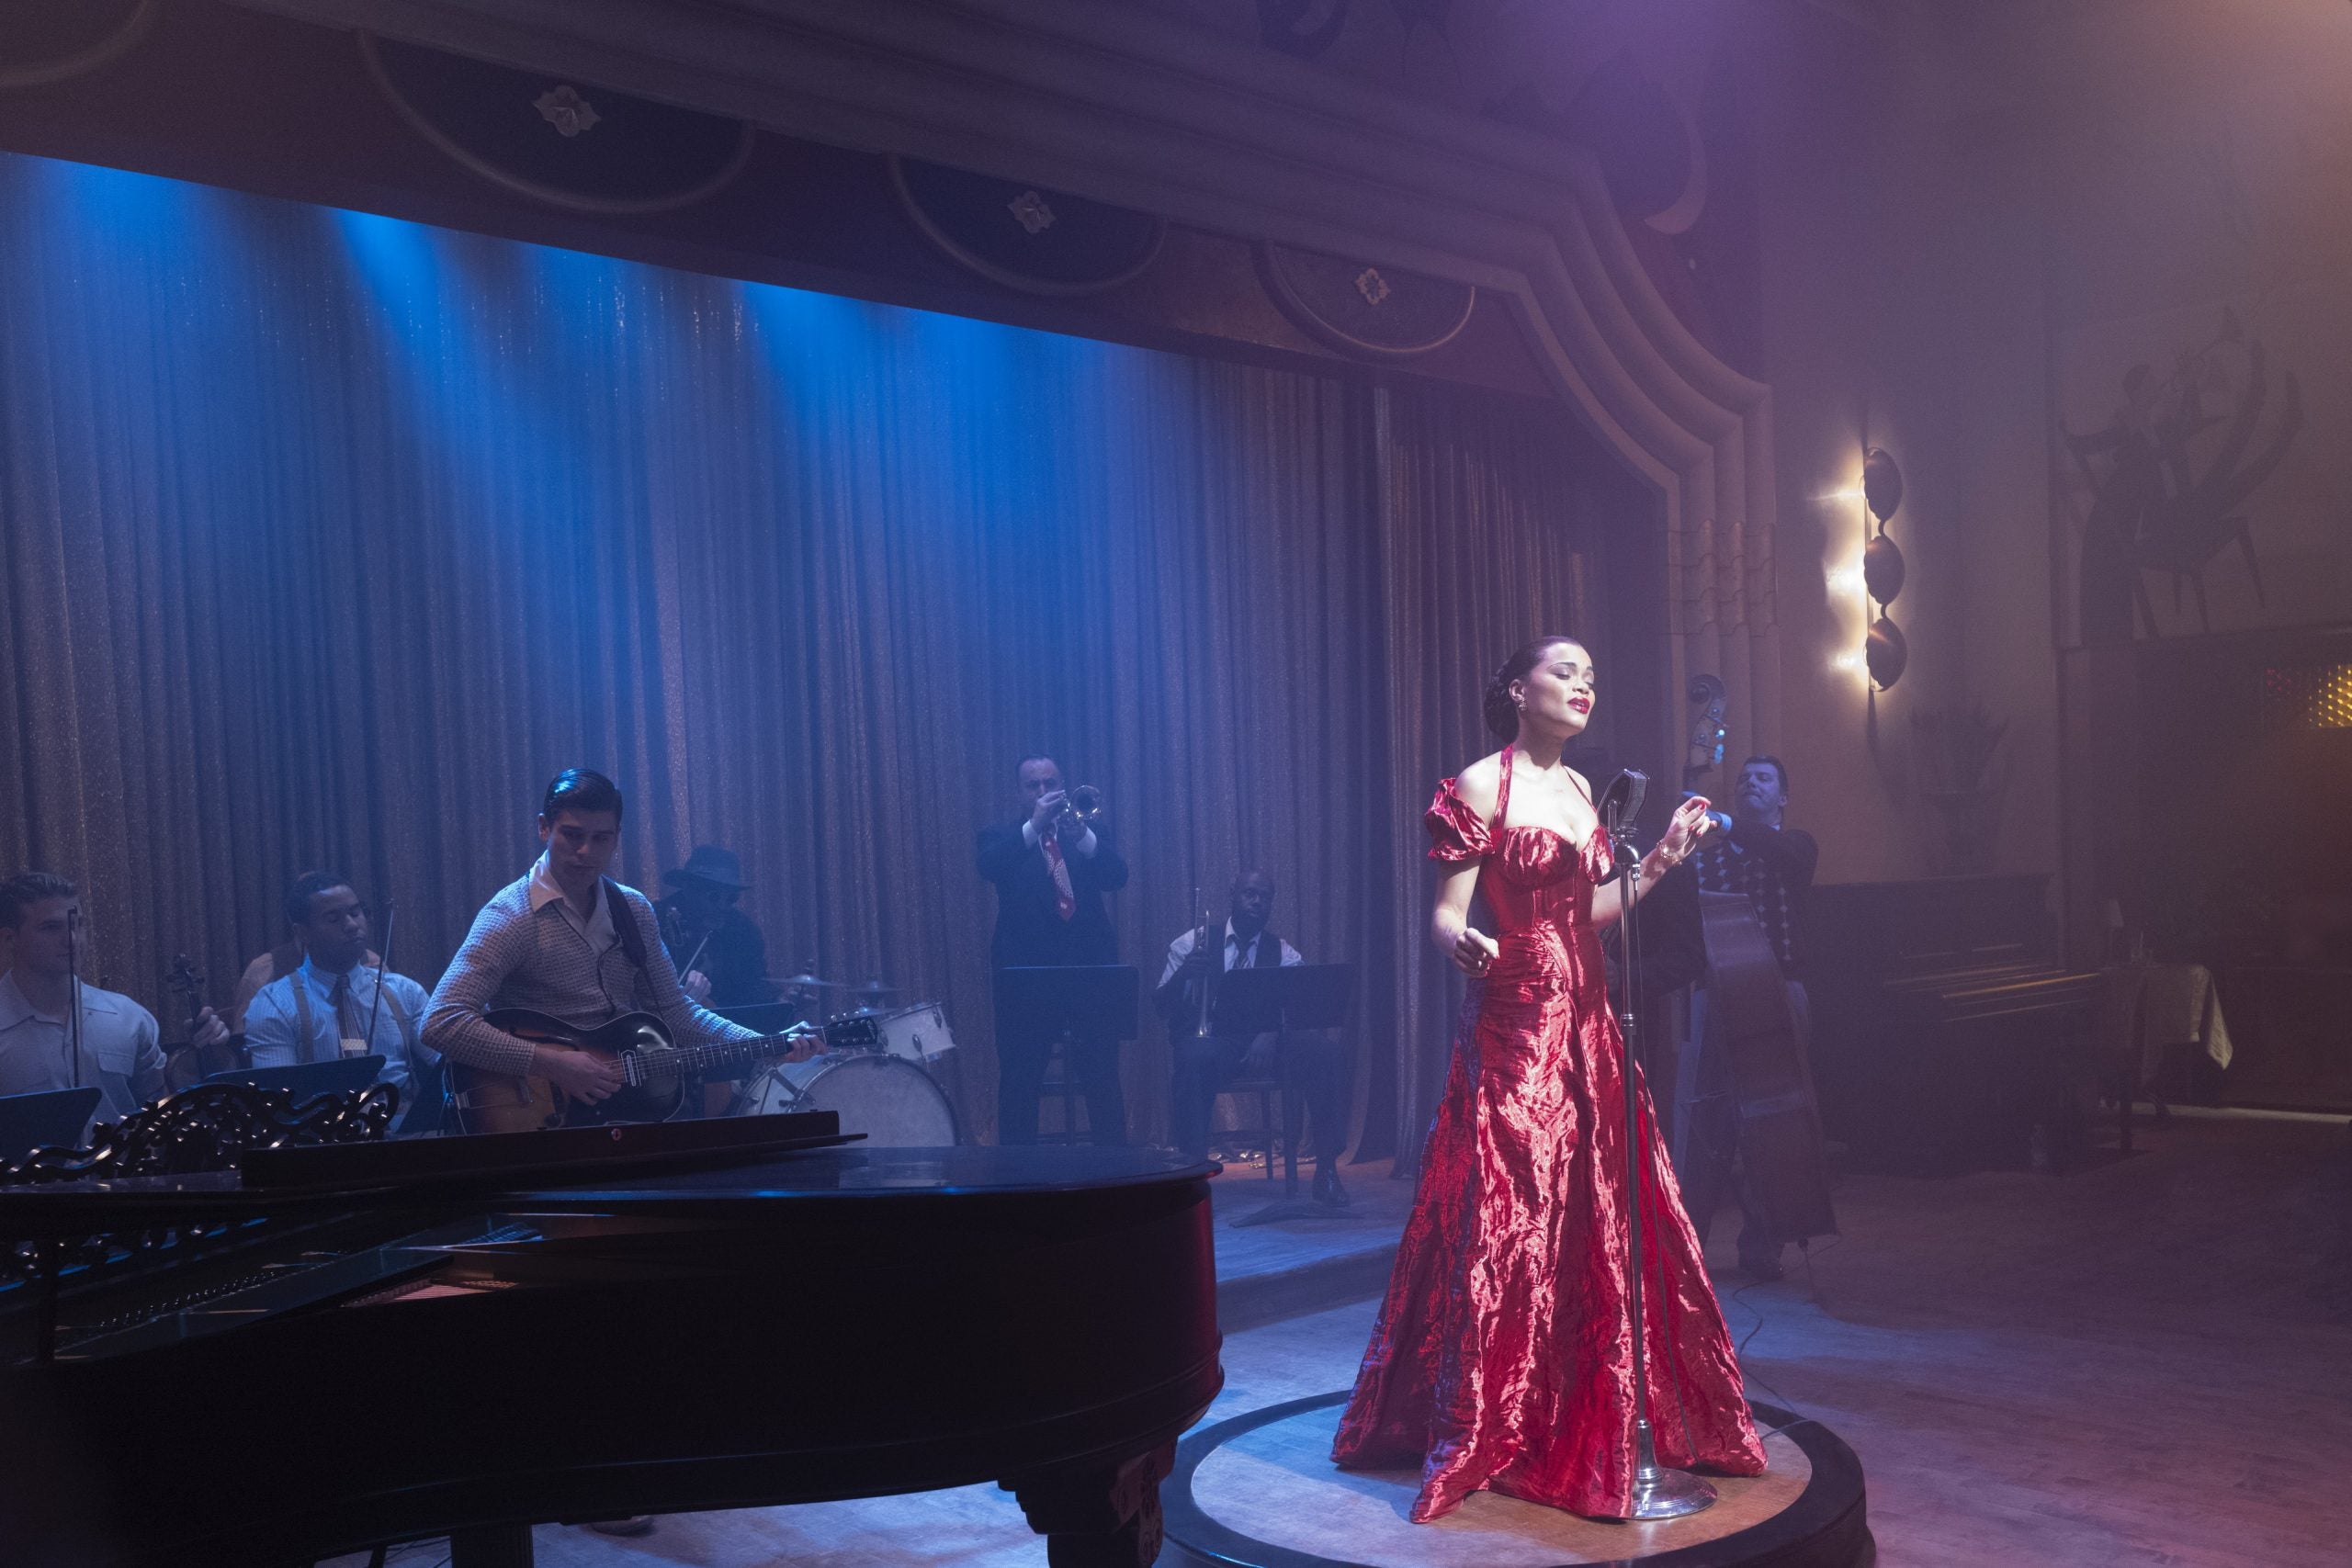 Prada Shares Designs For Upcoming Billie Holiday Film Starring Andra Day